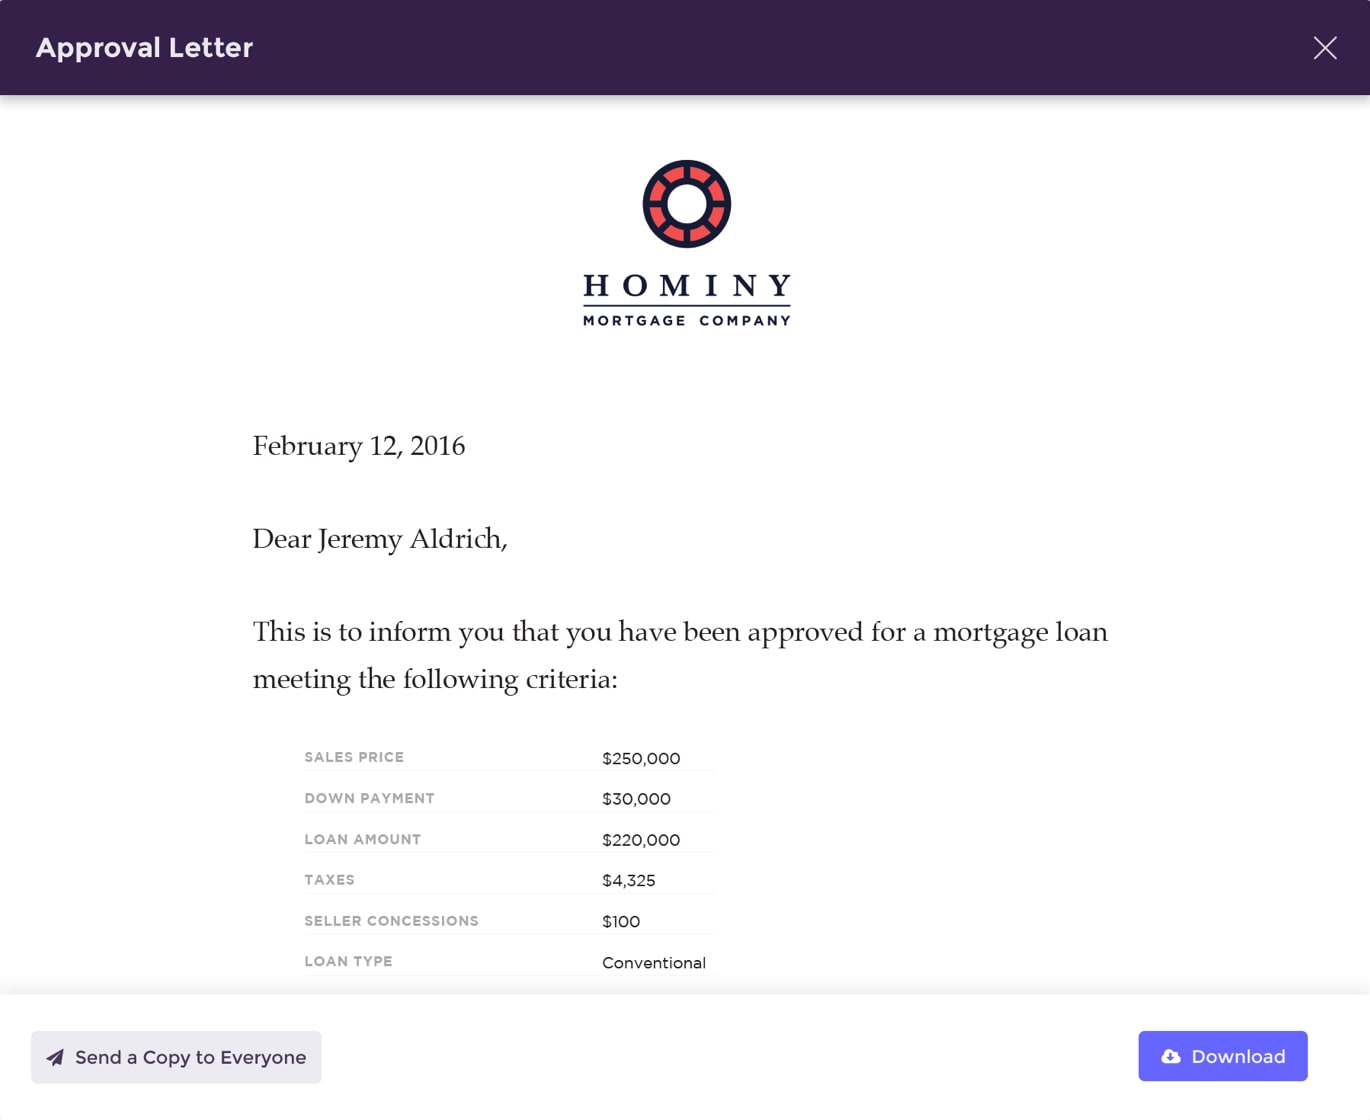 Approval letter for Steadkey mortgage startup